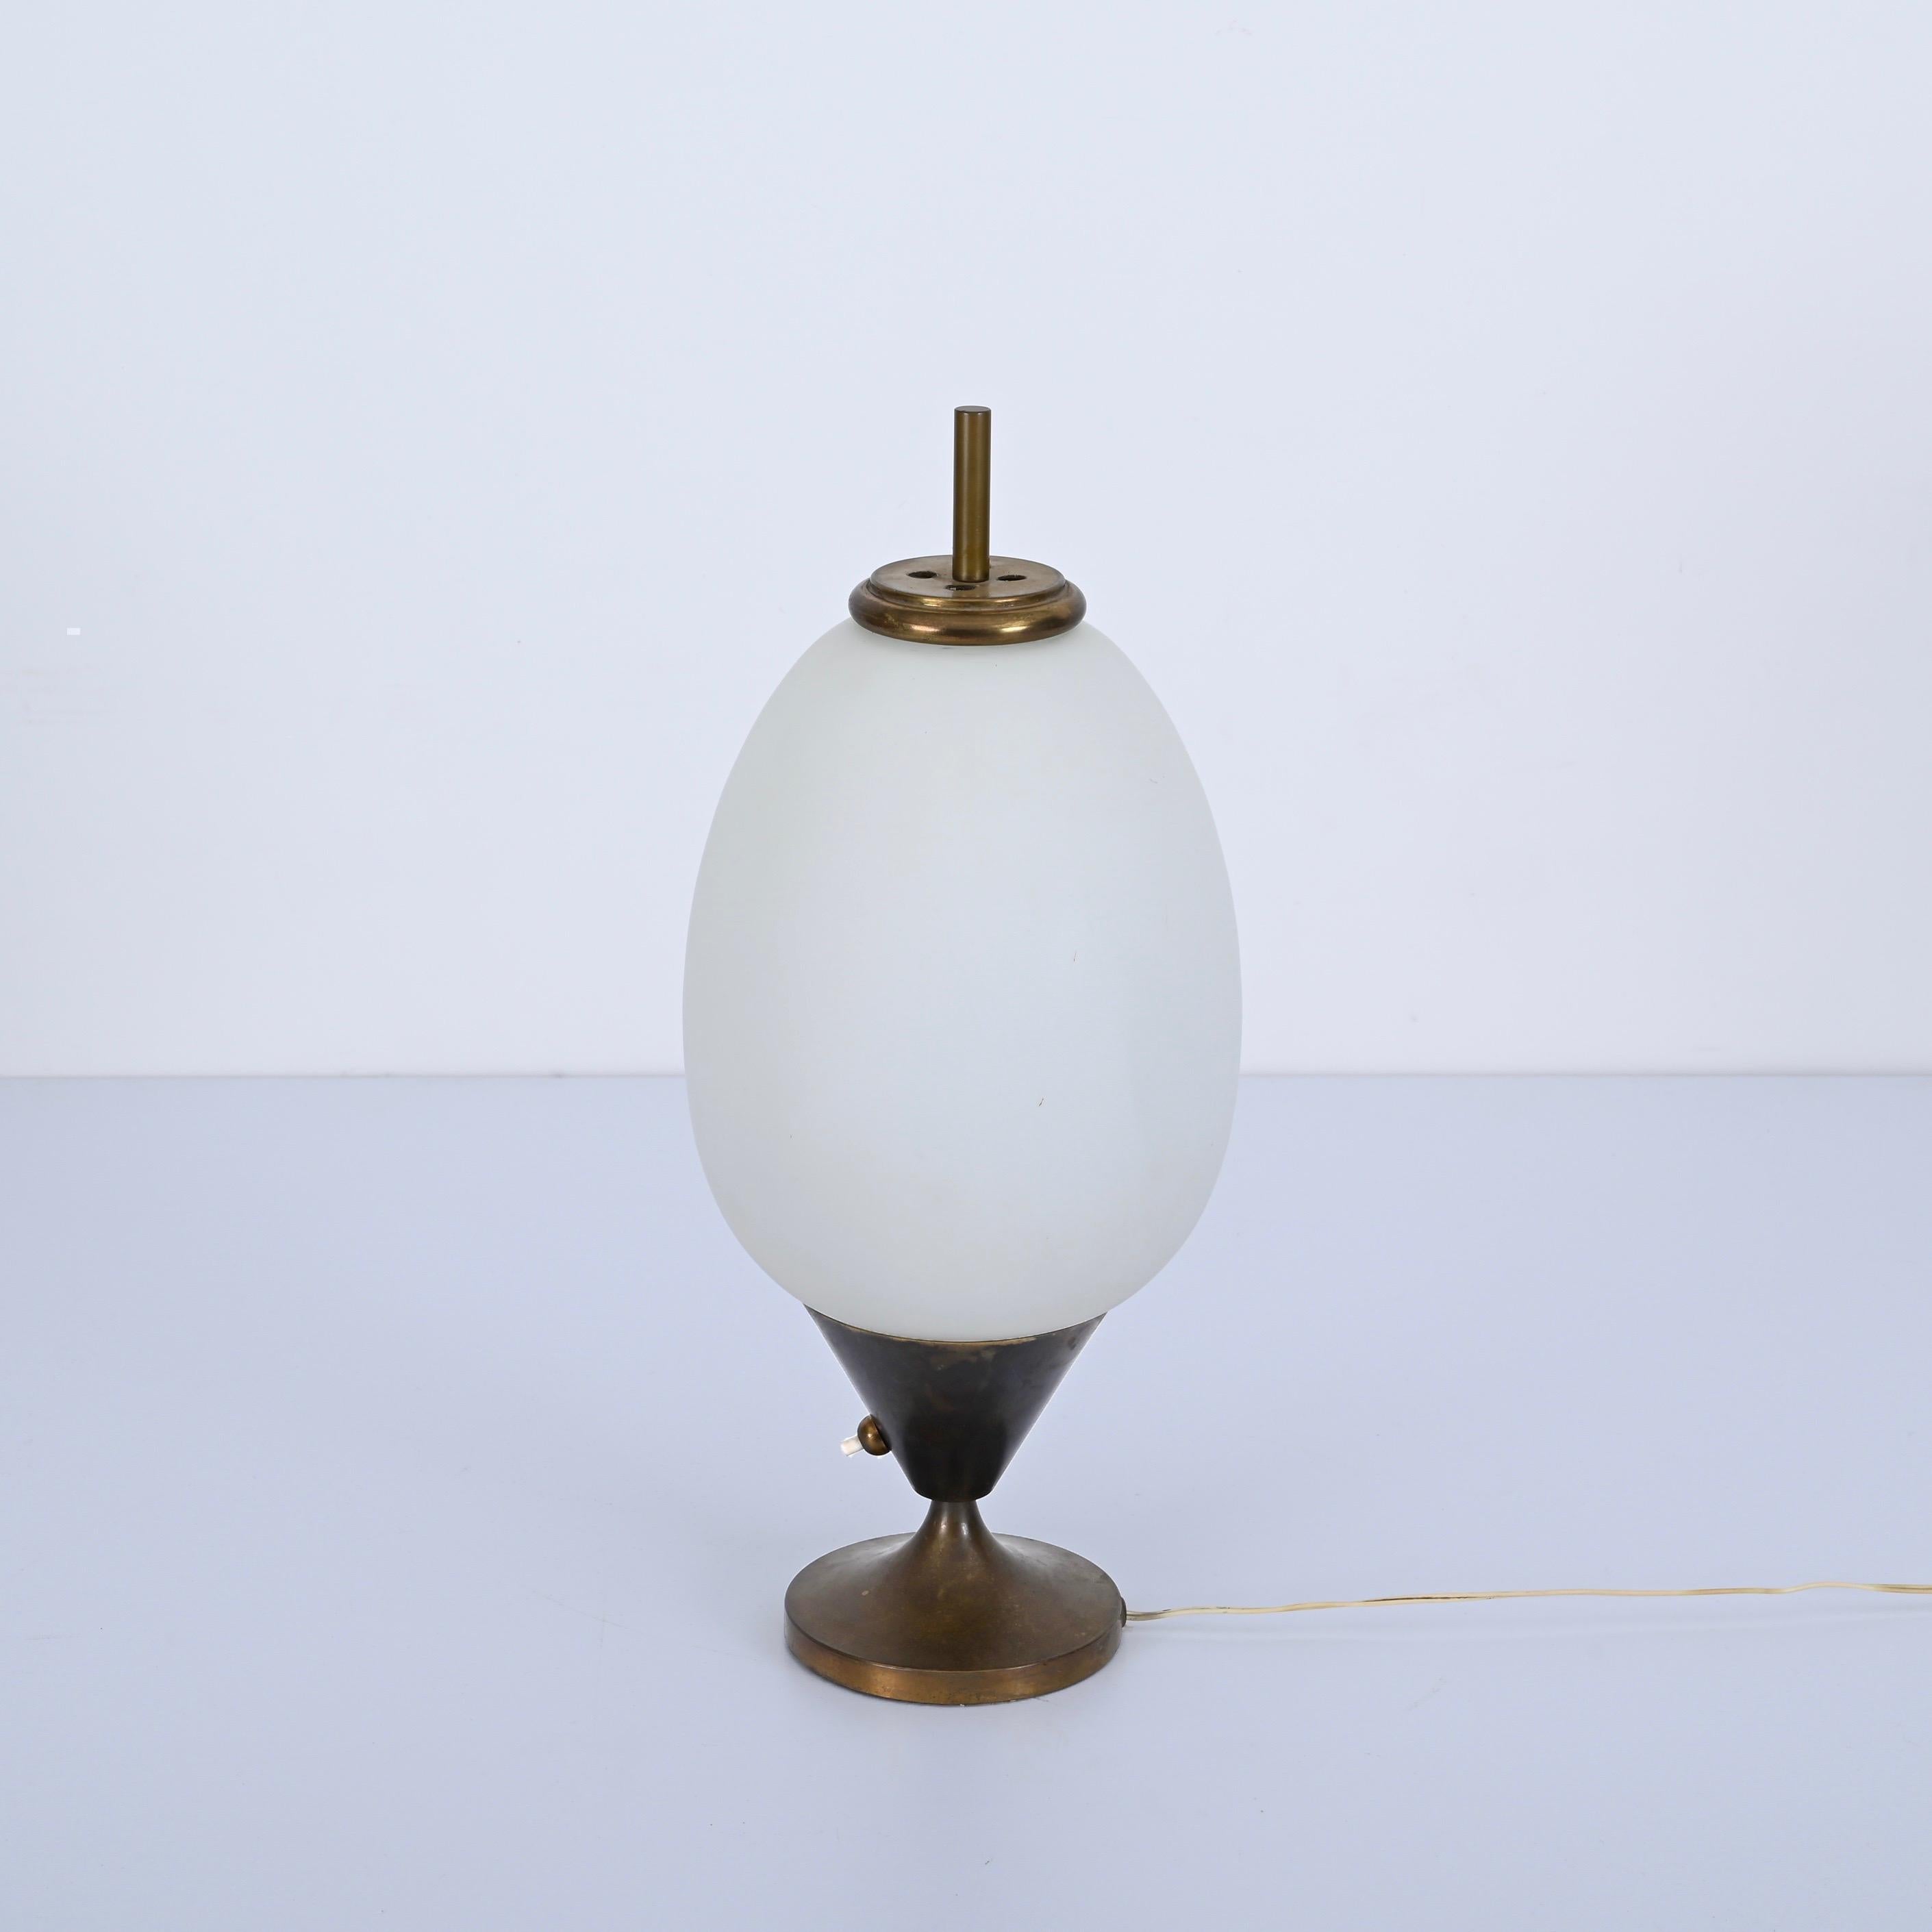 Mid-Century Modern Brass and Opaline Glass Egg-Shaped Italian Table Lamp, 1950s For Sale 8